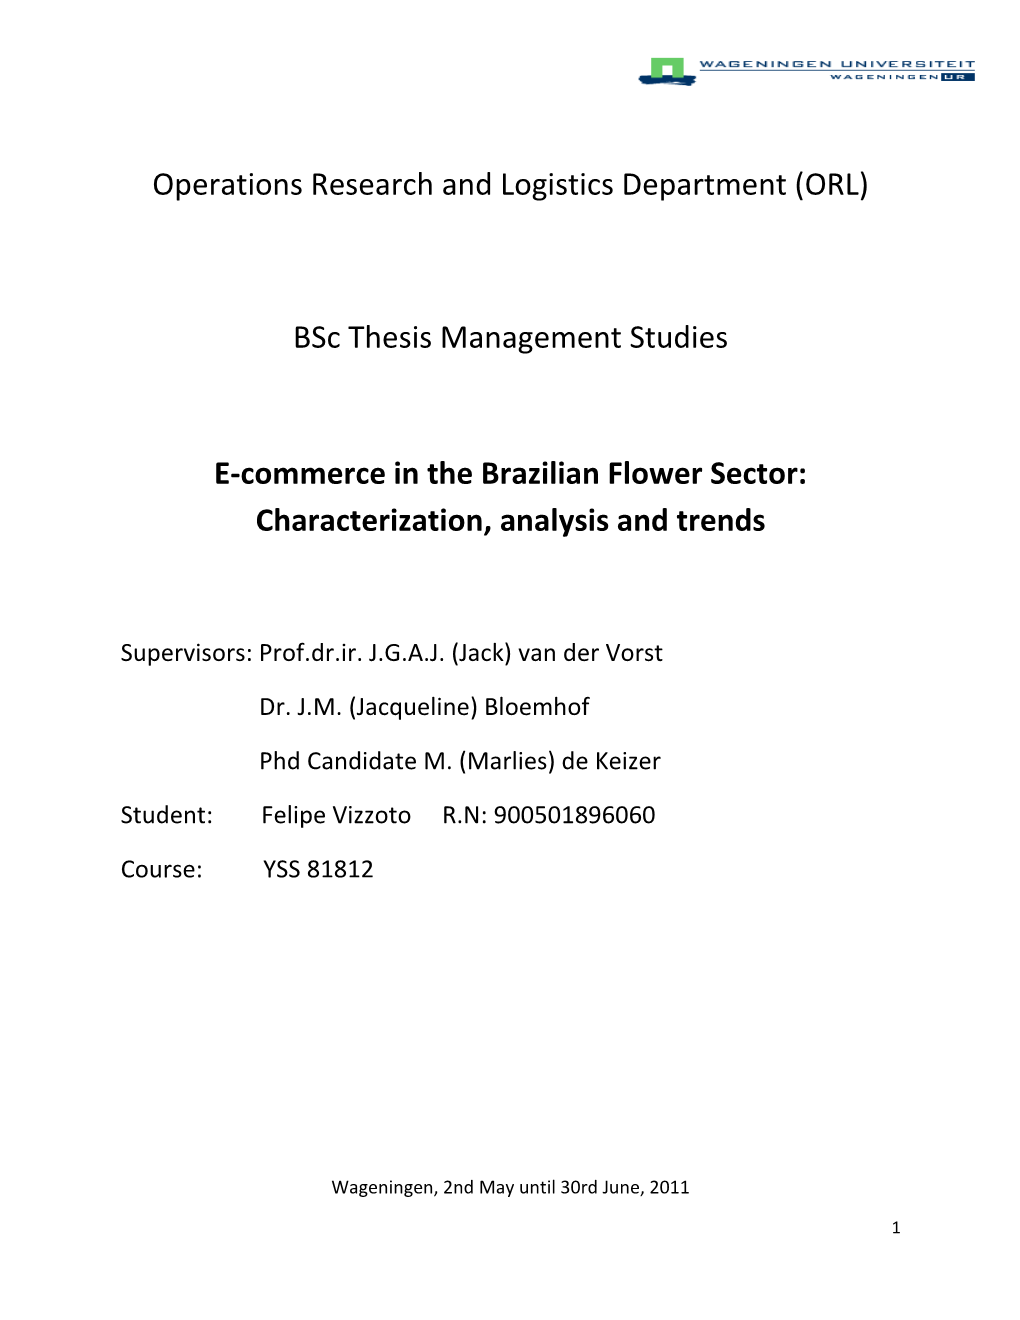 Operations Research and Logistics Department (ORL) Bsc Thesis